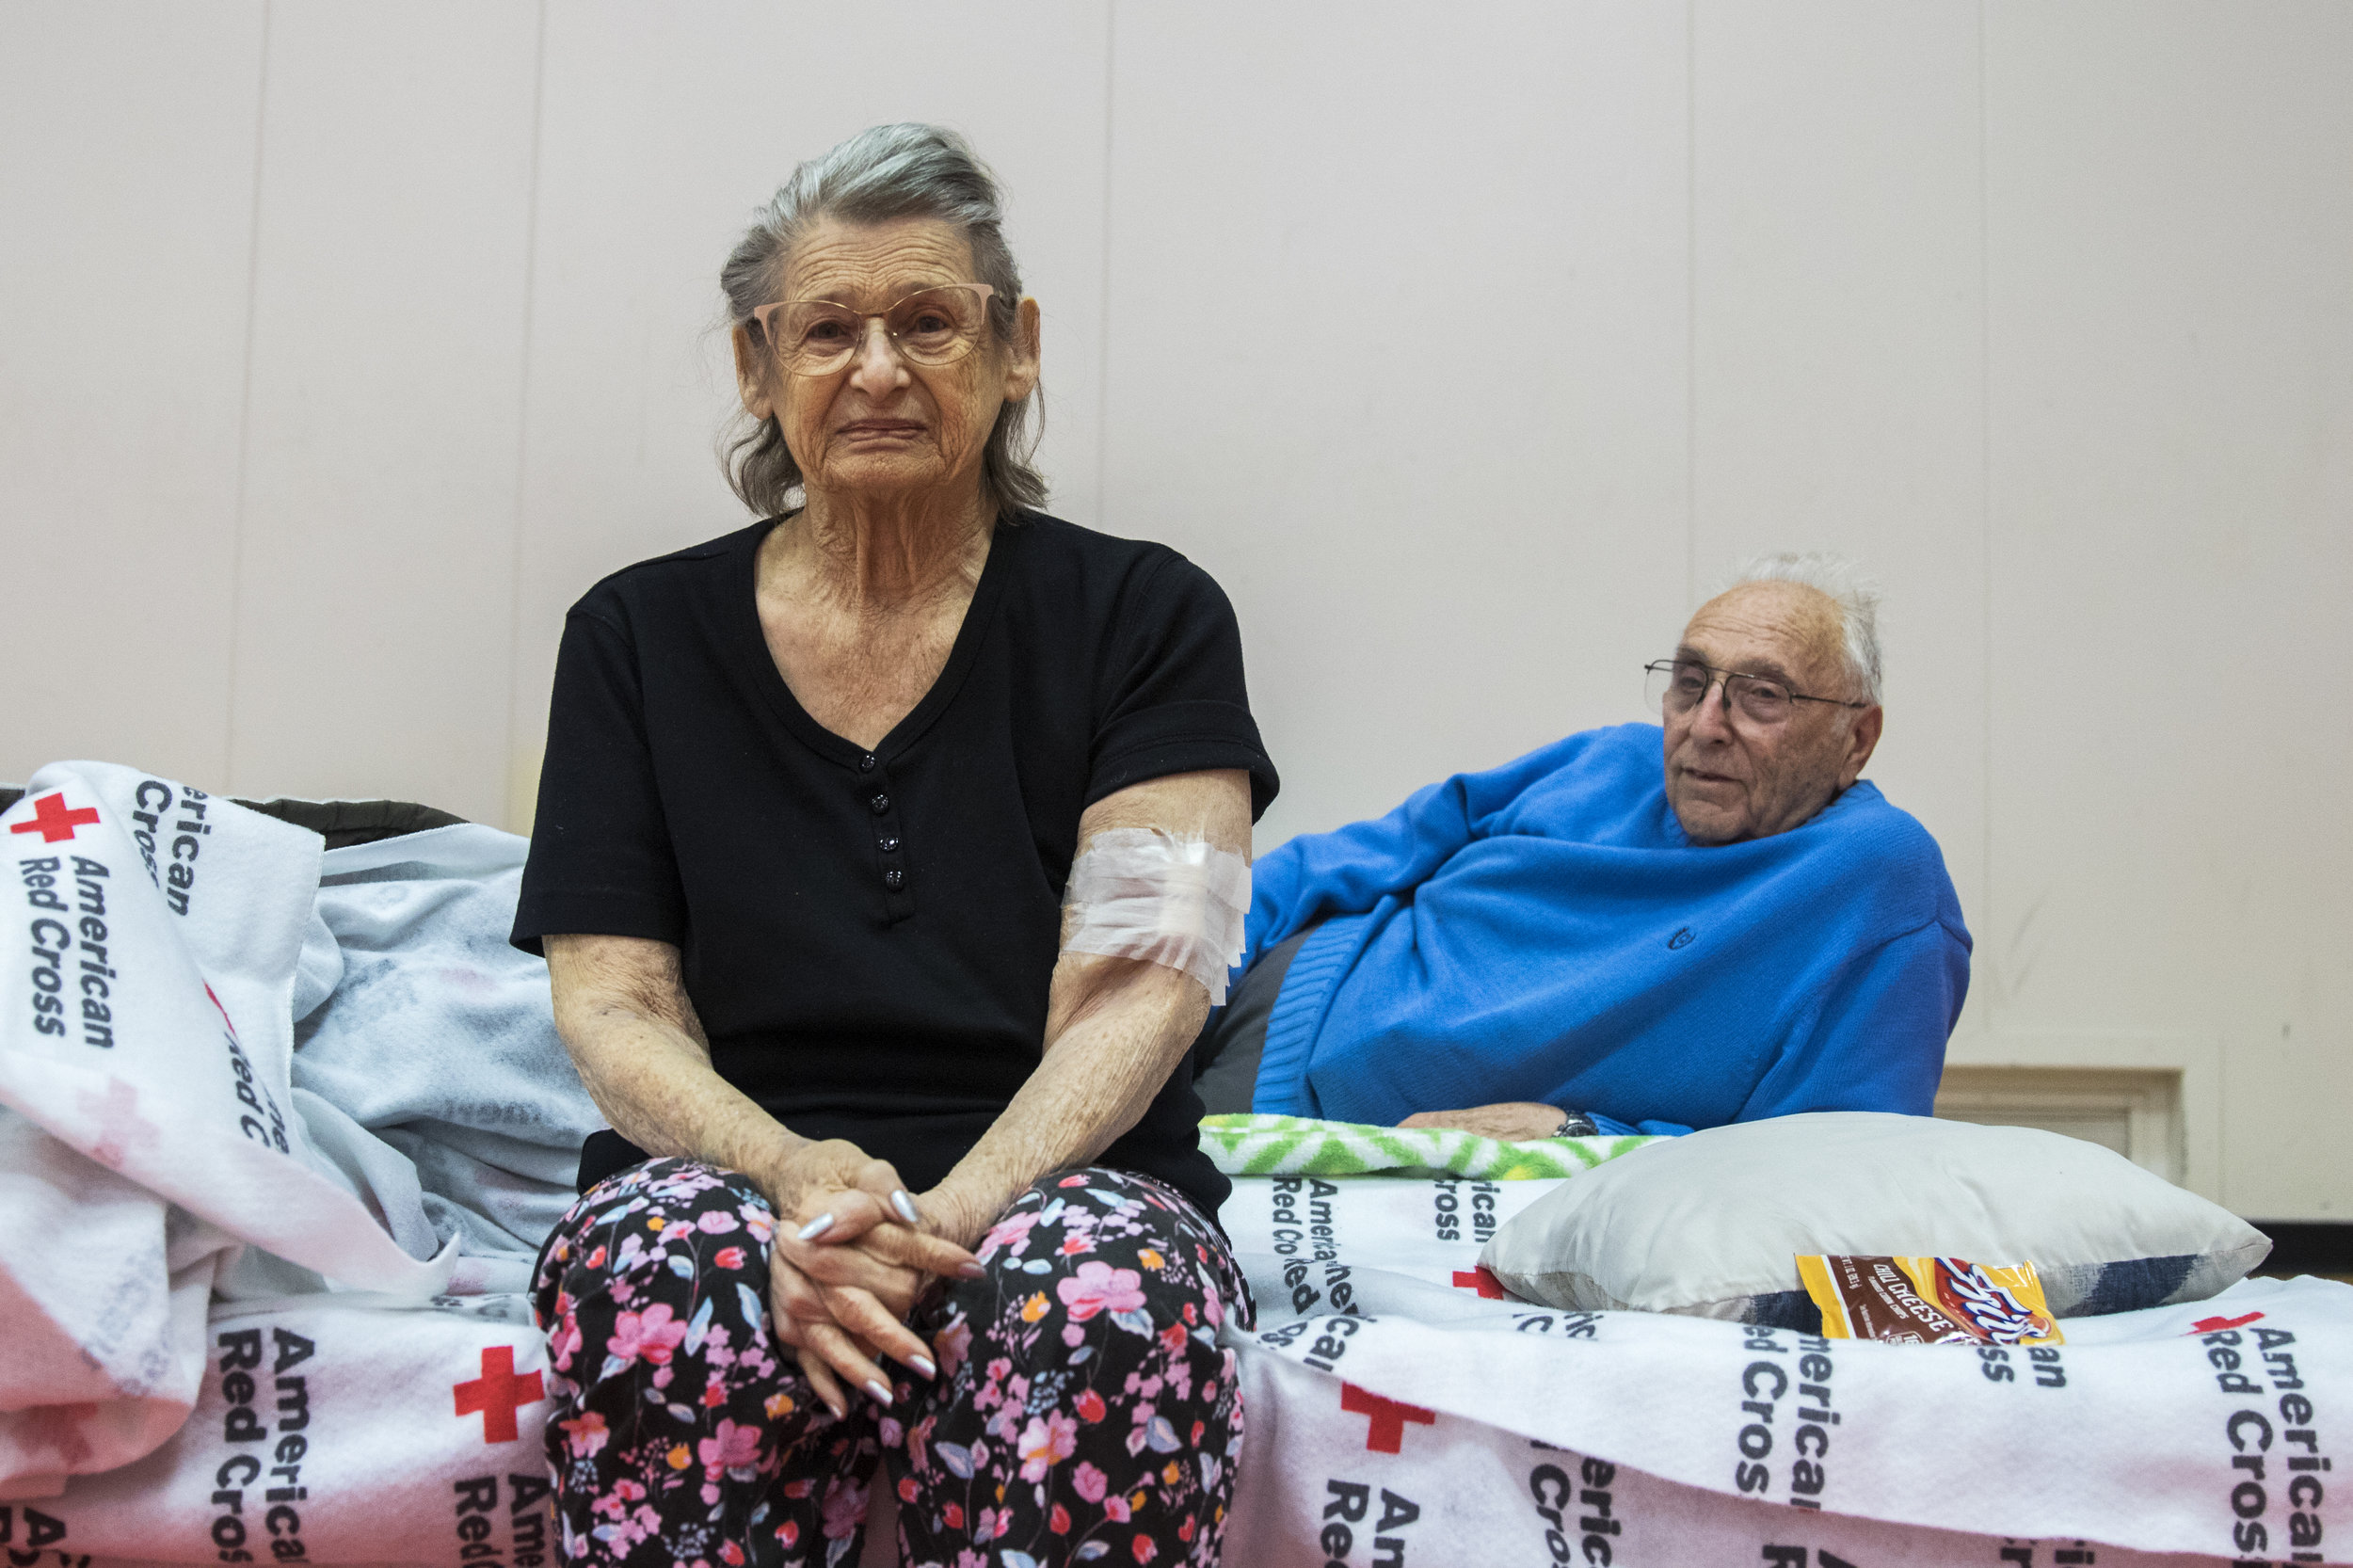  Penny Stark (left) and Ron Stark (right) relax at an evacuation center located at Pierce College in Woodland Hills, California on November 9, 2018 after evacuating their home in Oak Park, California the night before. The started their evacuation wit